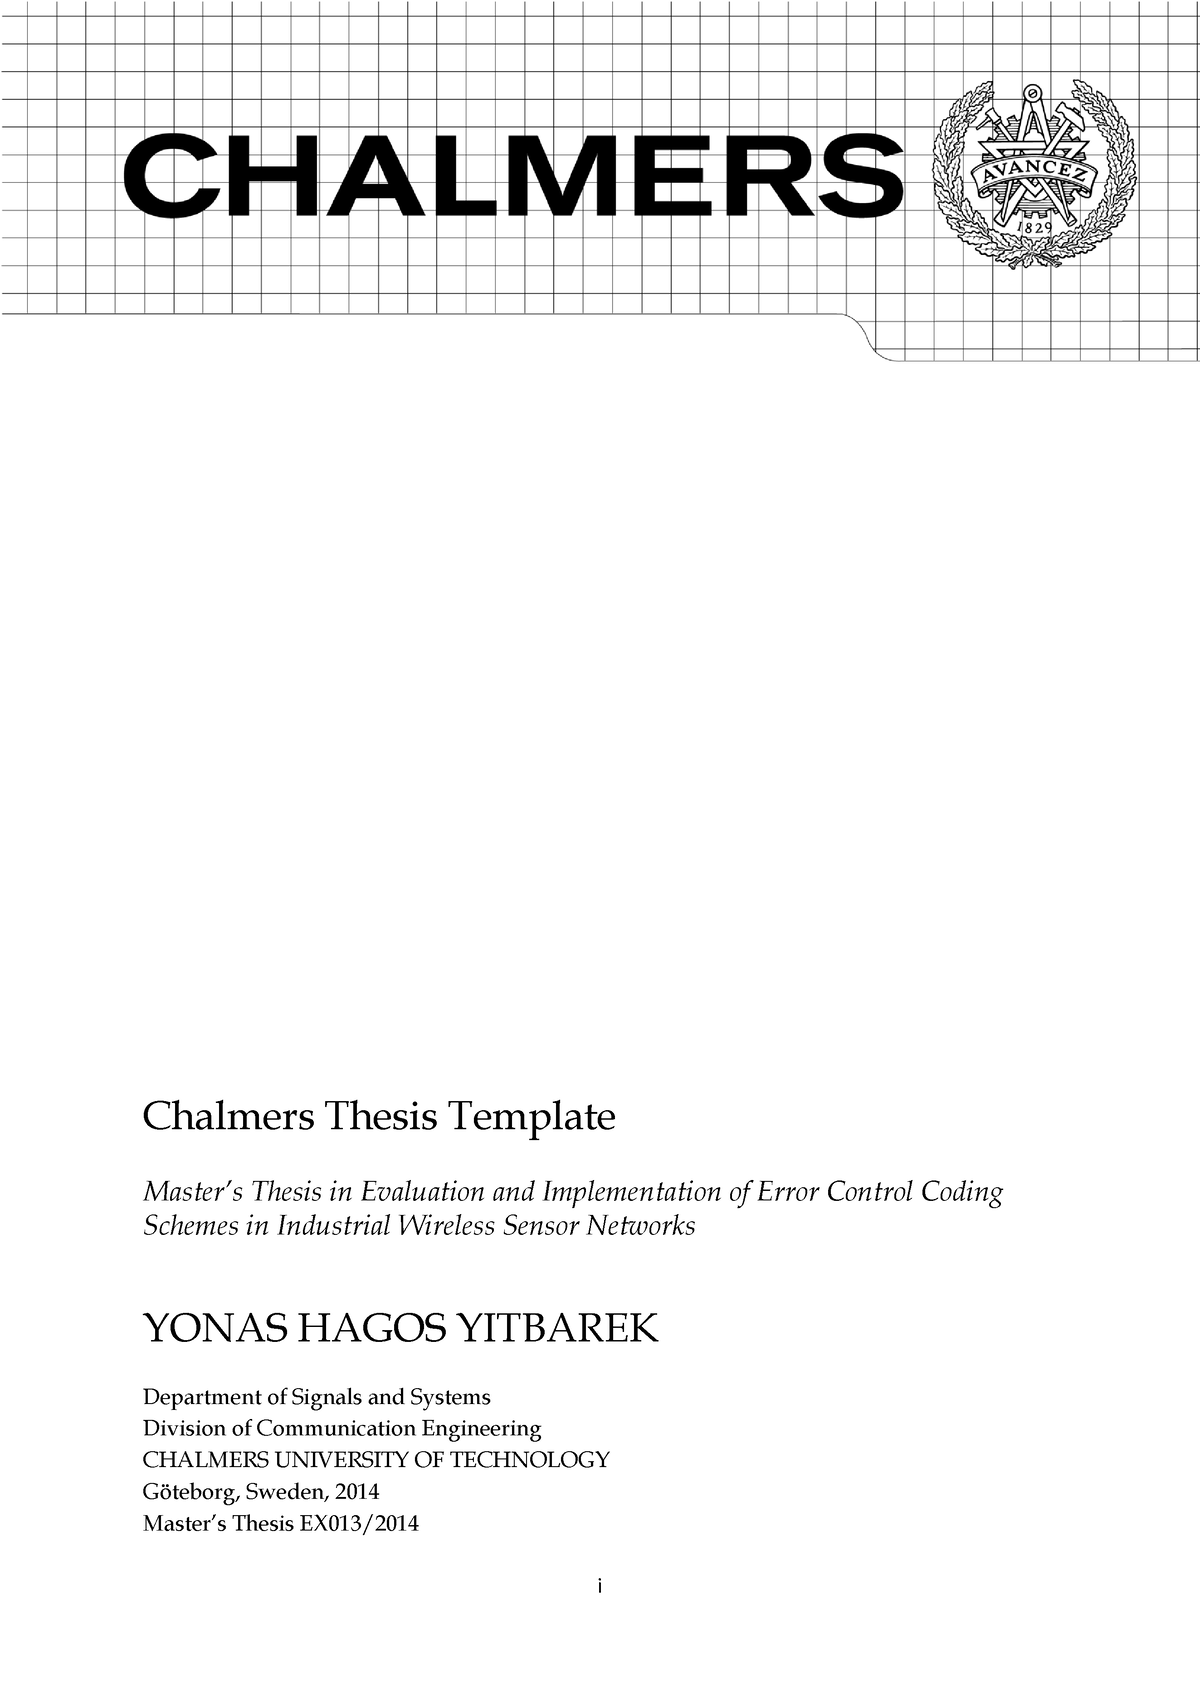 master thesis template chalmers